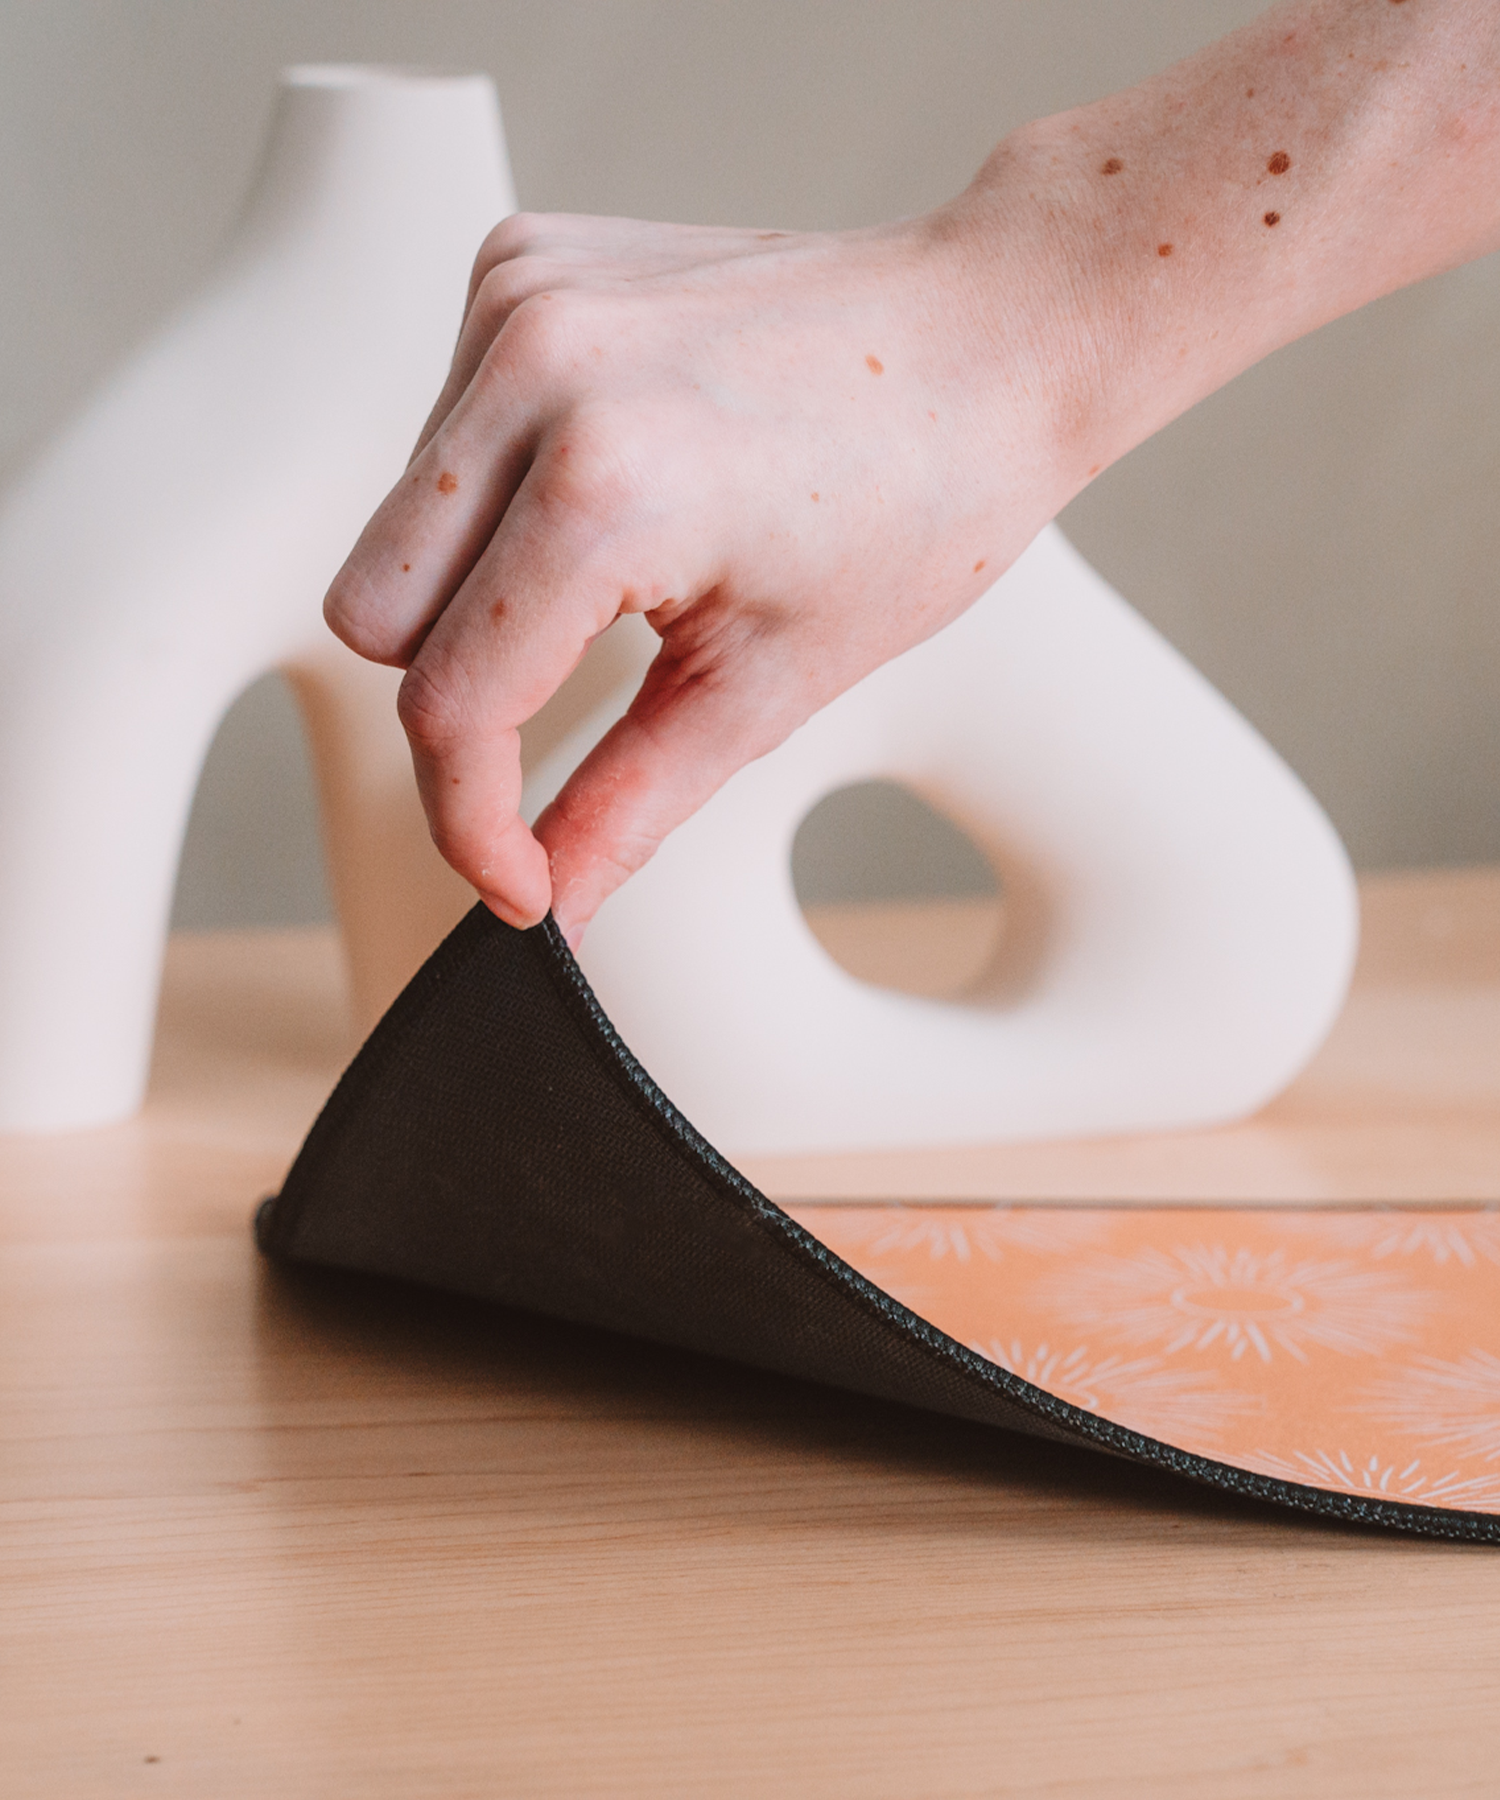 A hand is lifting up the corner of the Soleil mousepad to reveal the black, anti-slip rubber backing. In the background are two asymmetrical vases.